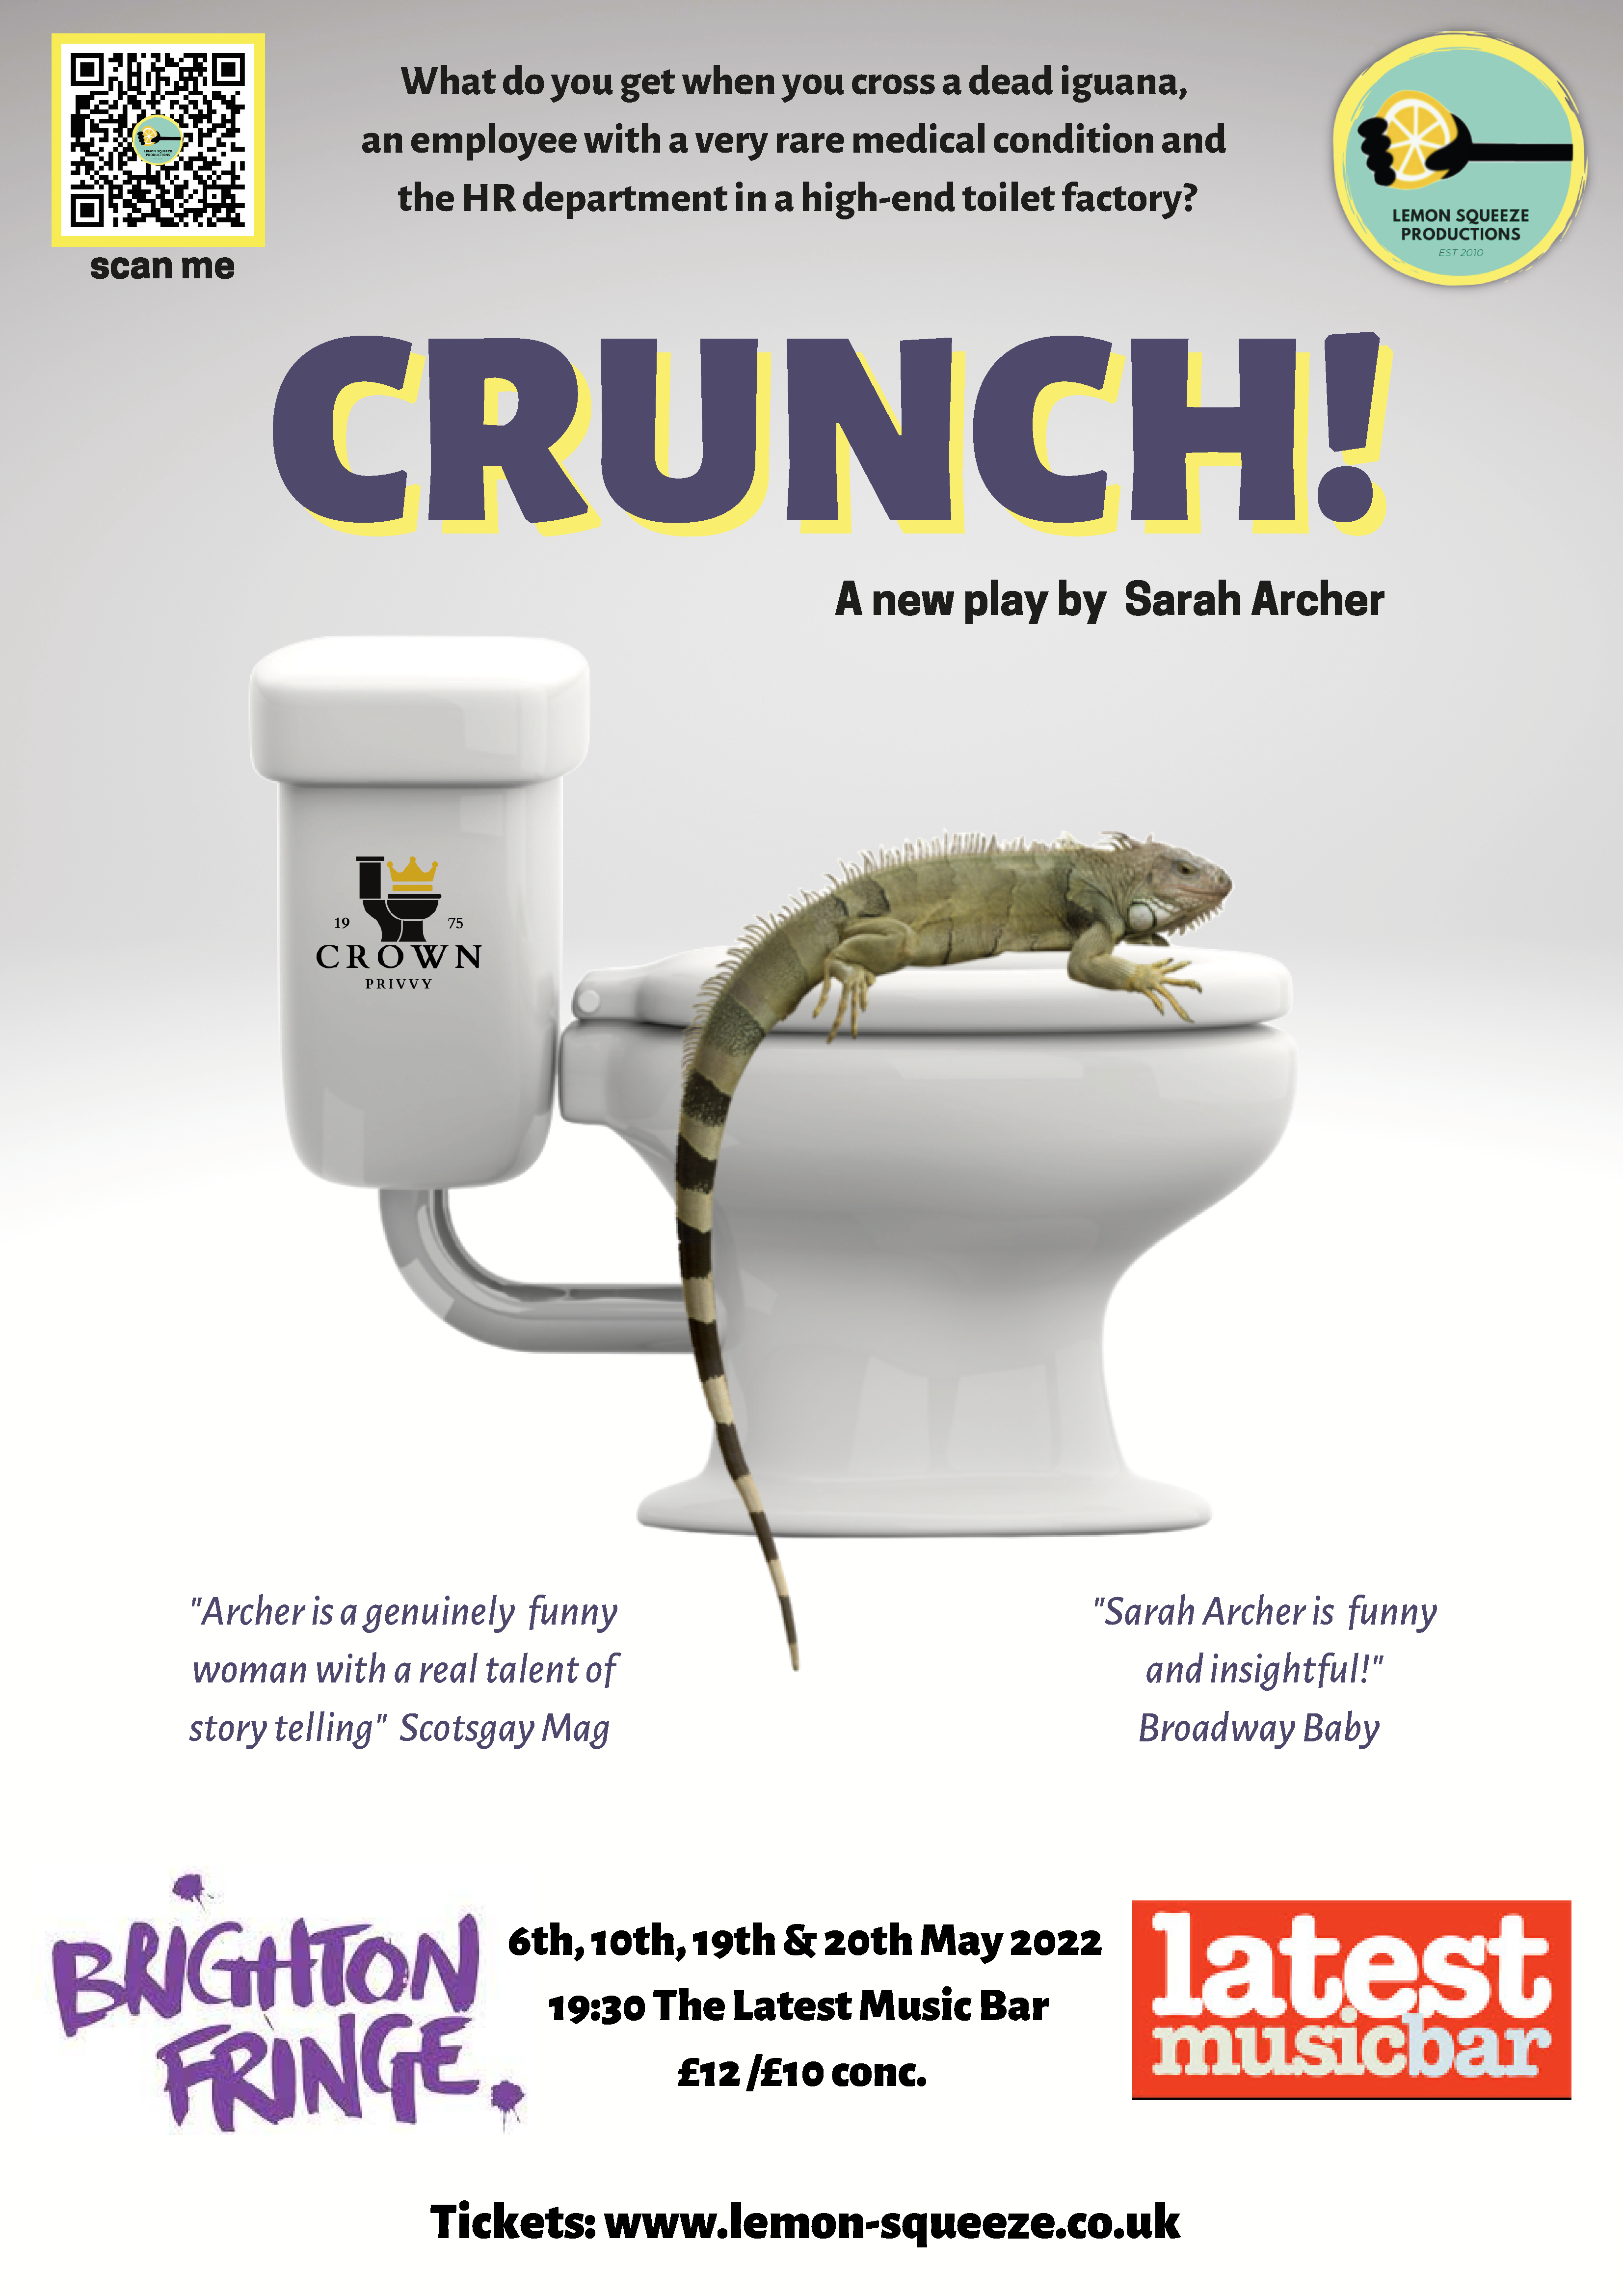 'Crunch' the play